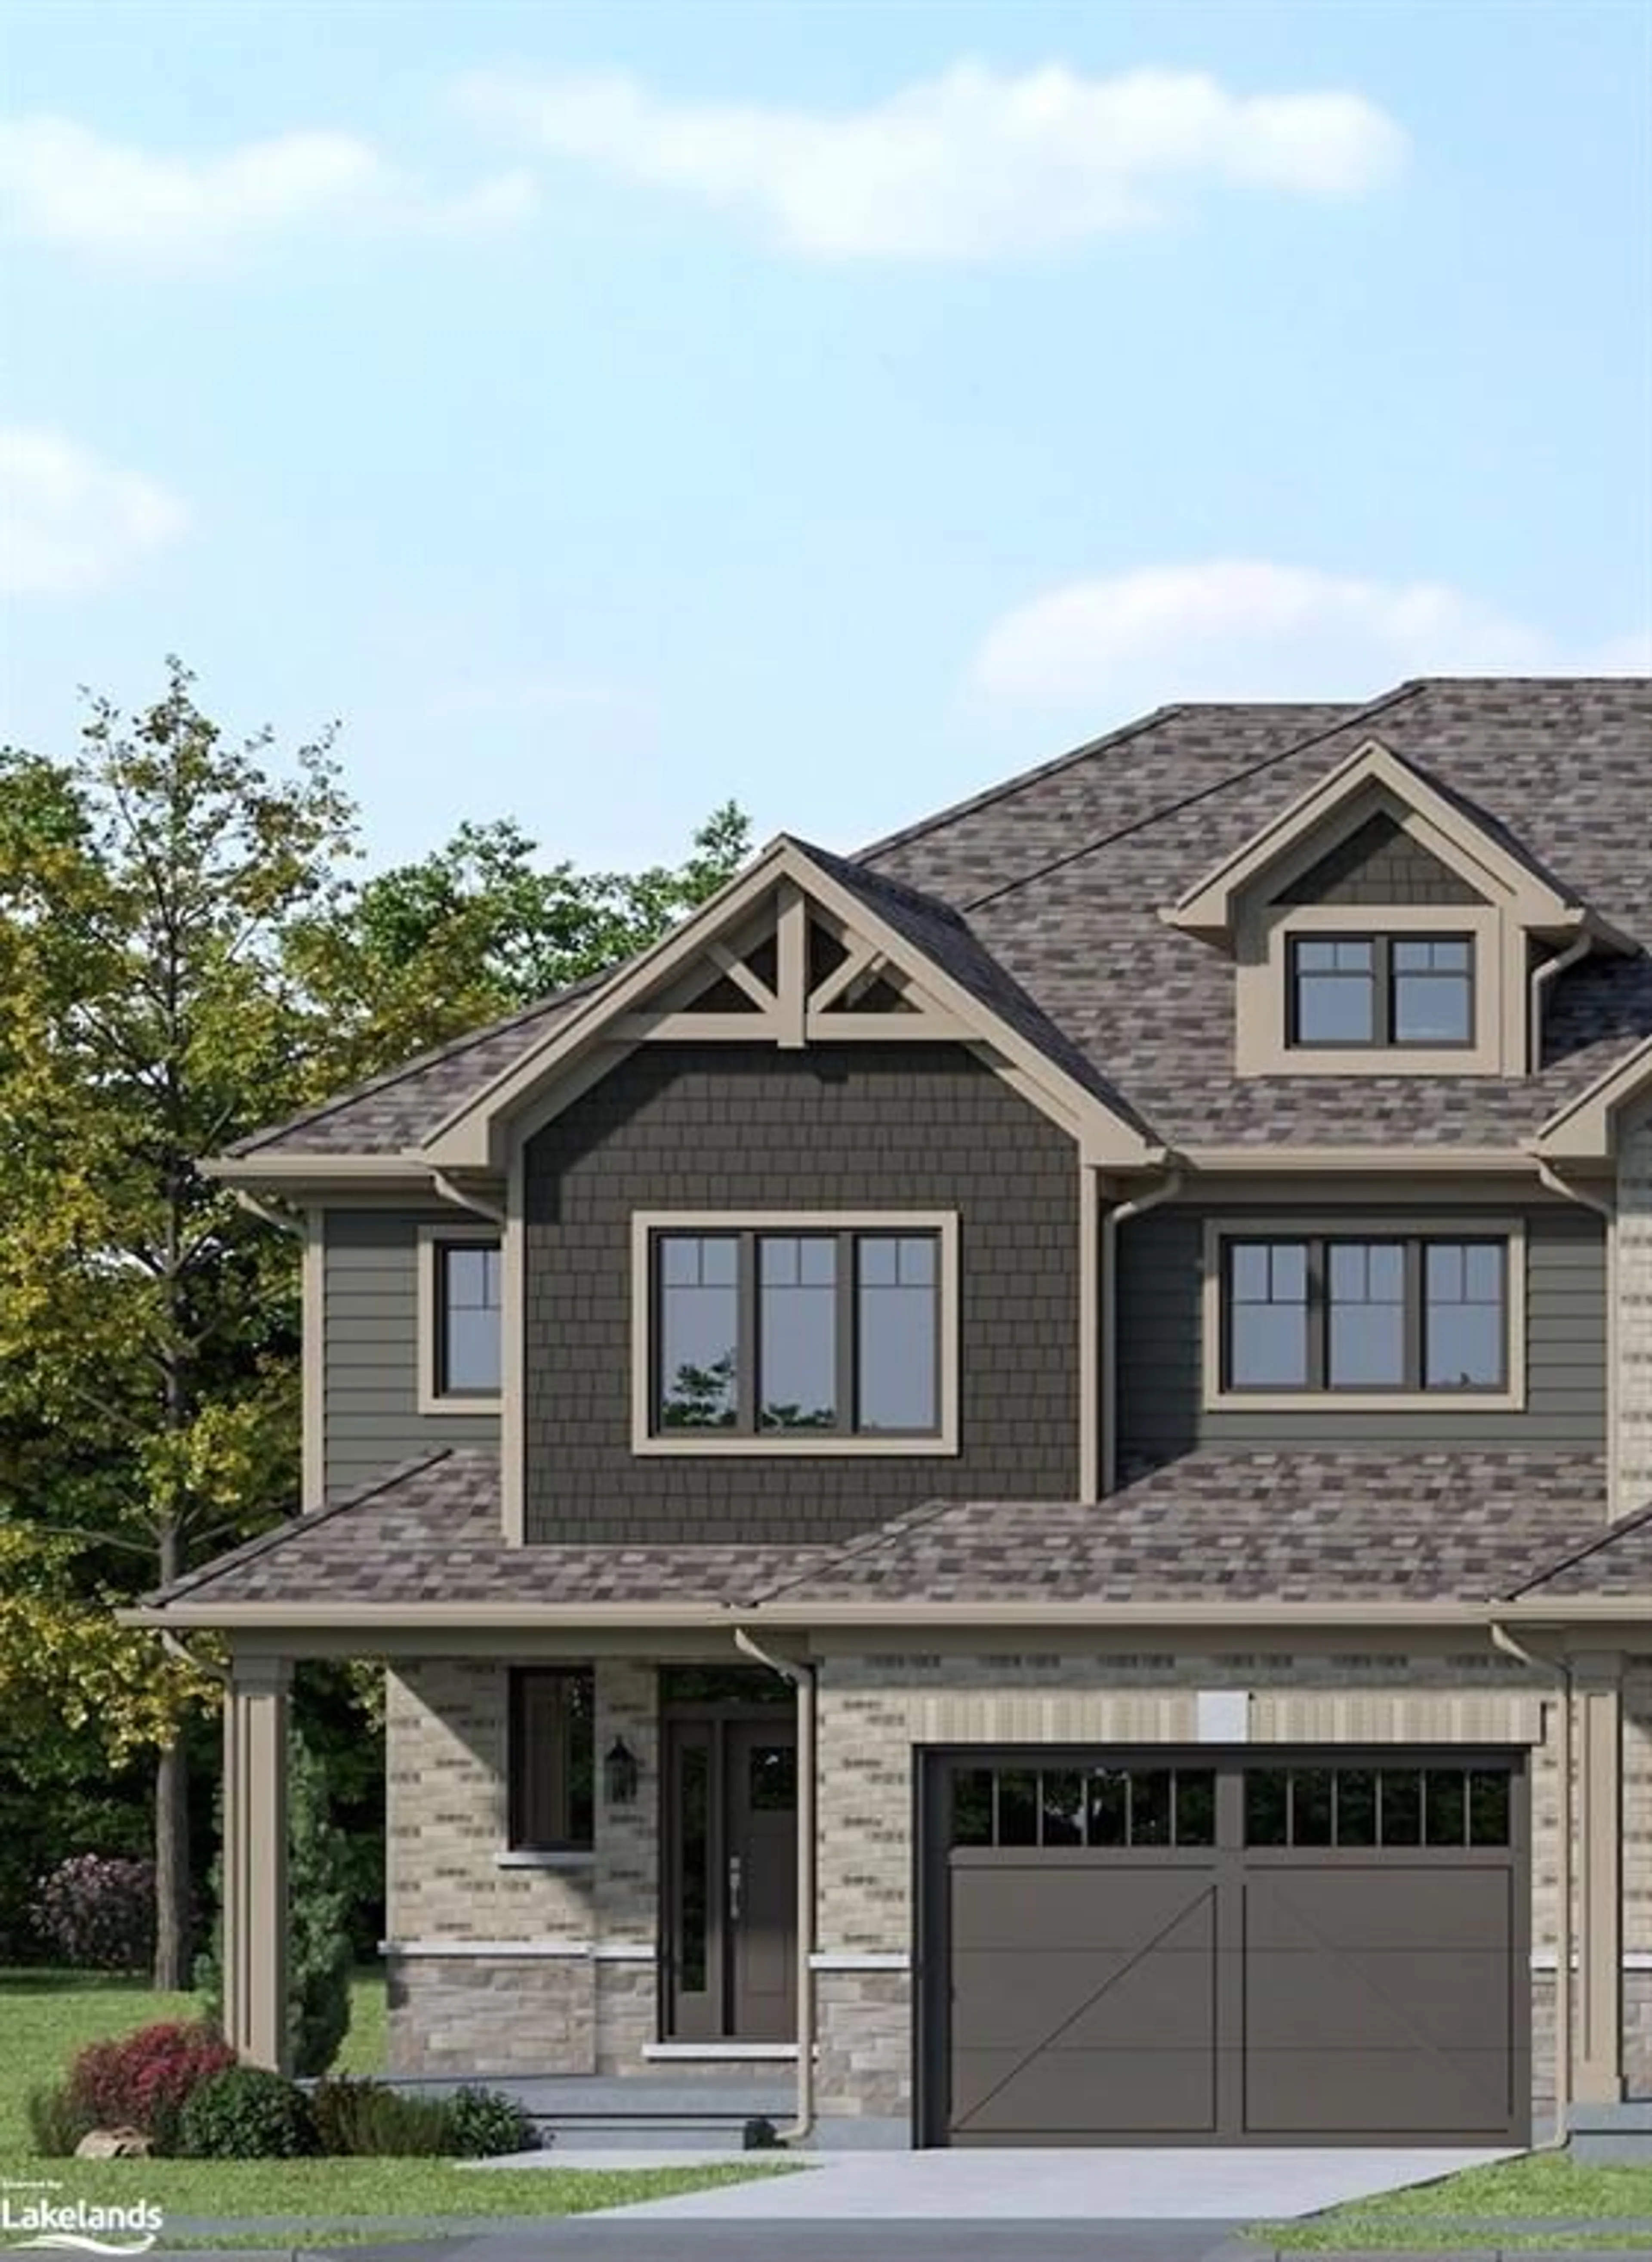 Home with brick exterior material for LOT 40 Swain Cres, Collingwood Ontario L9Y 2L3